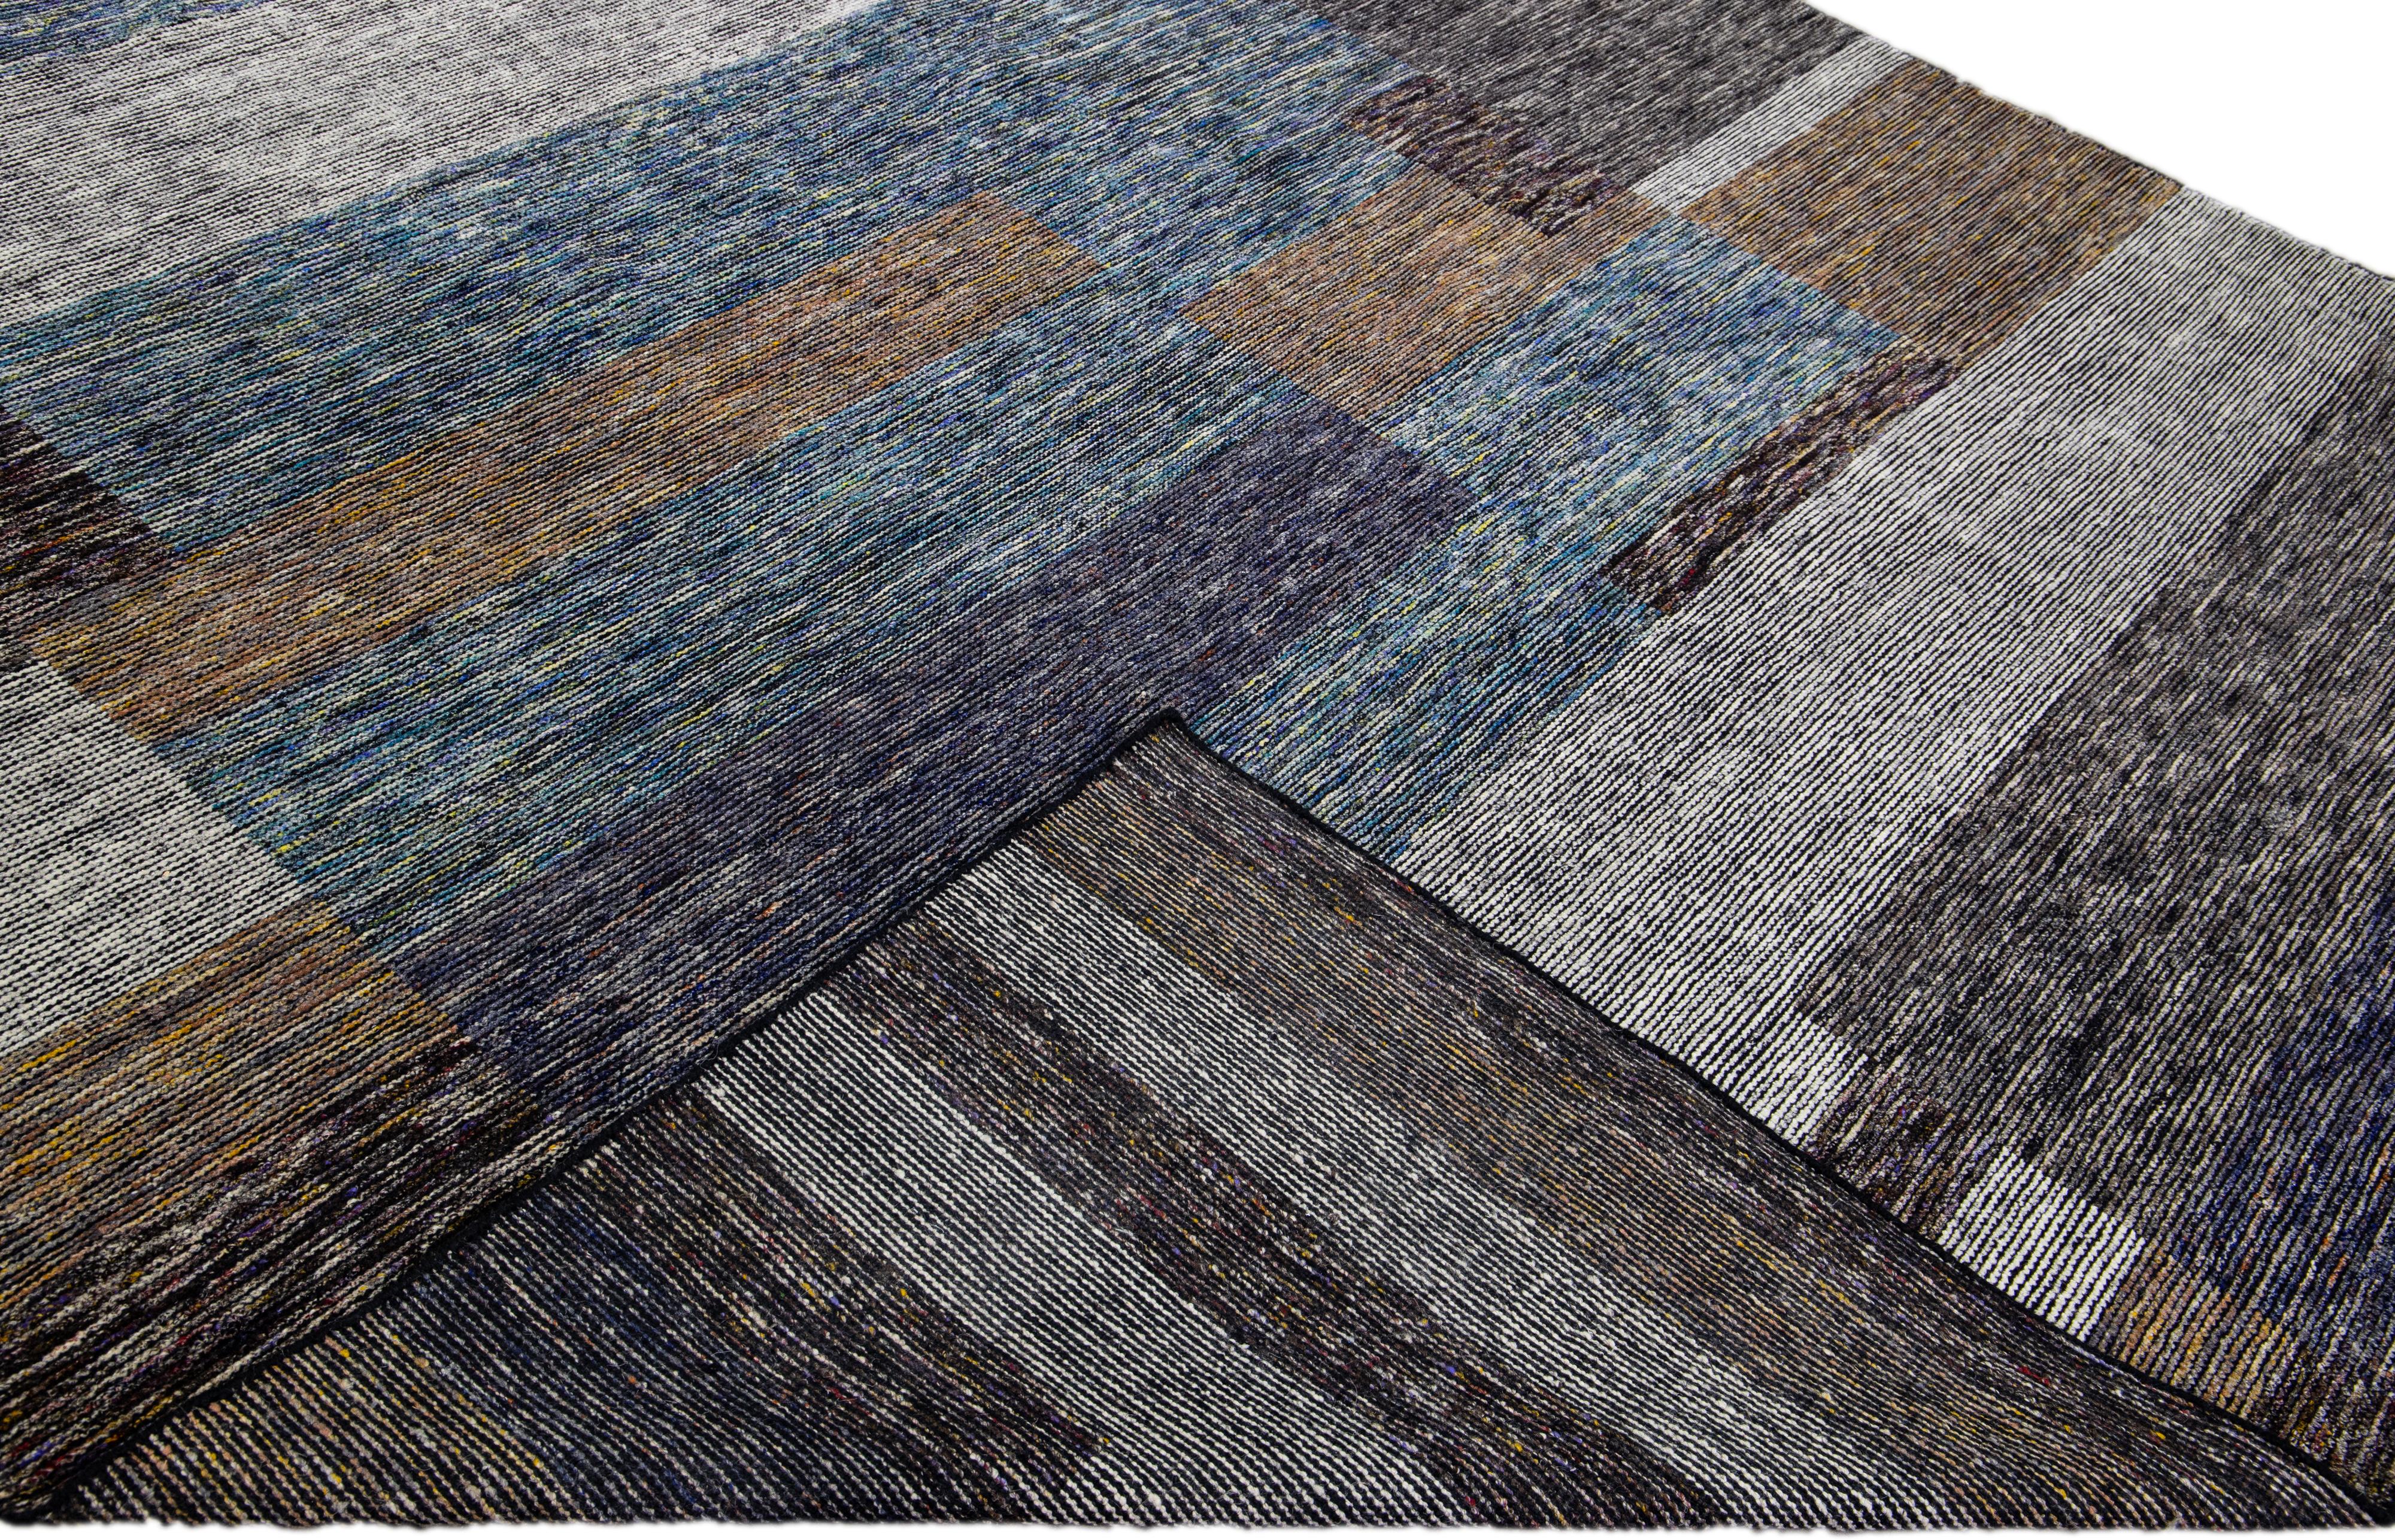 Beautiful modern Apadana's Safi Collection hand-knotted wool rug with an earthy colors field. This Modern rug has blue, gray, and brown accents a gorgeous layout Abstract design.

This rug measures: 9'4